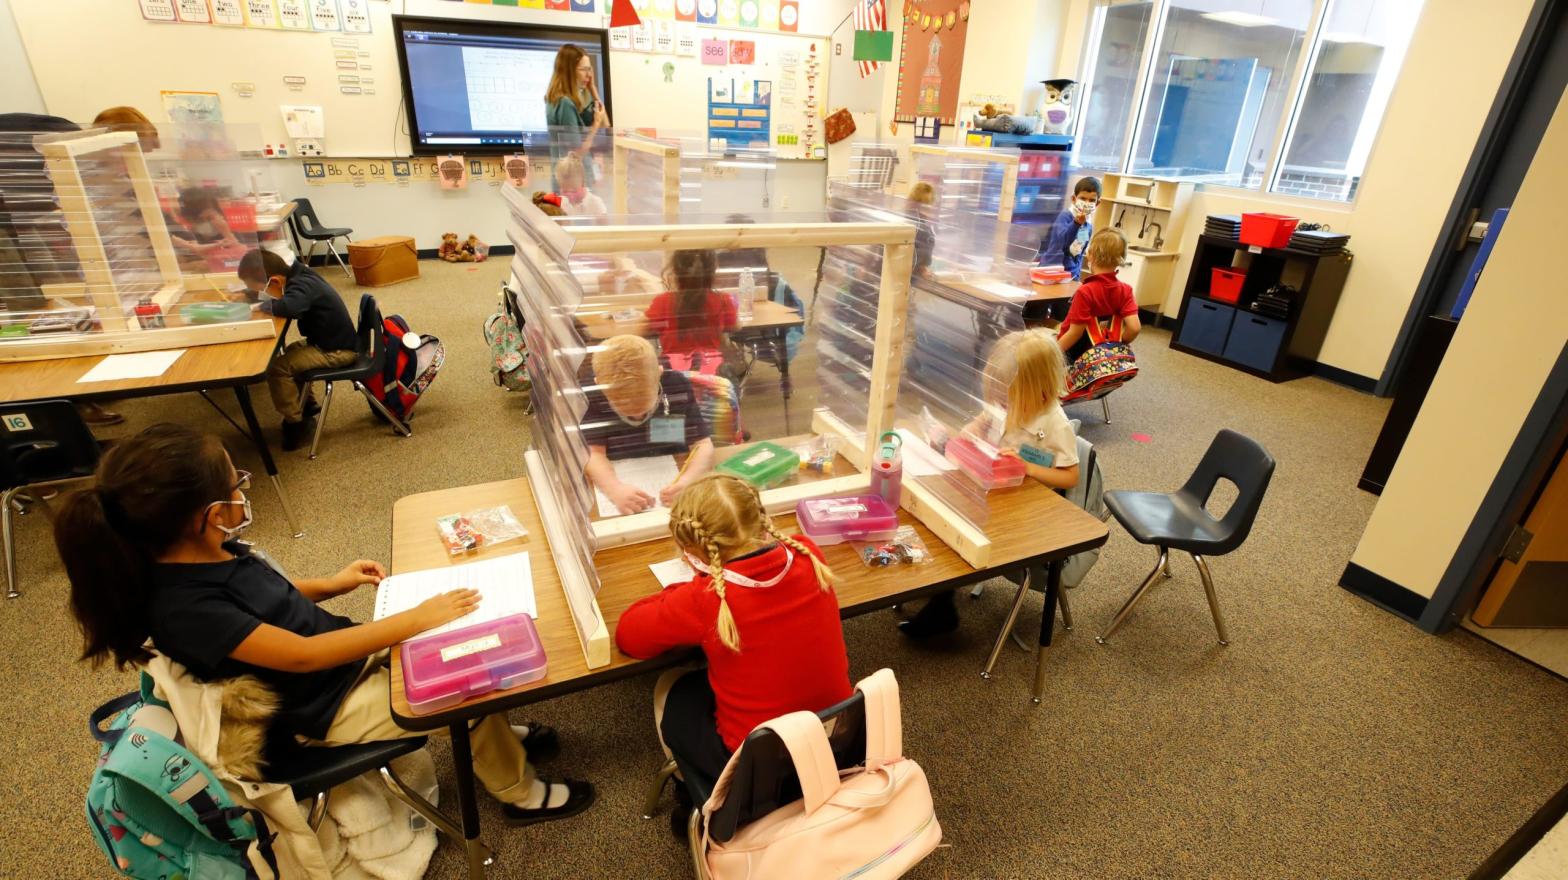 Kindergarten students work behind shields at their table at Freedom Preparatory Academy on September 10, 2020 in Provo, Utah. (Photo: GEORGE FREY/AFP, Getty Images)